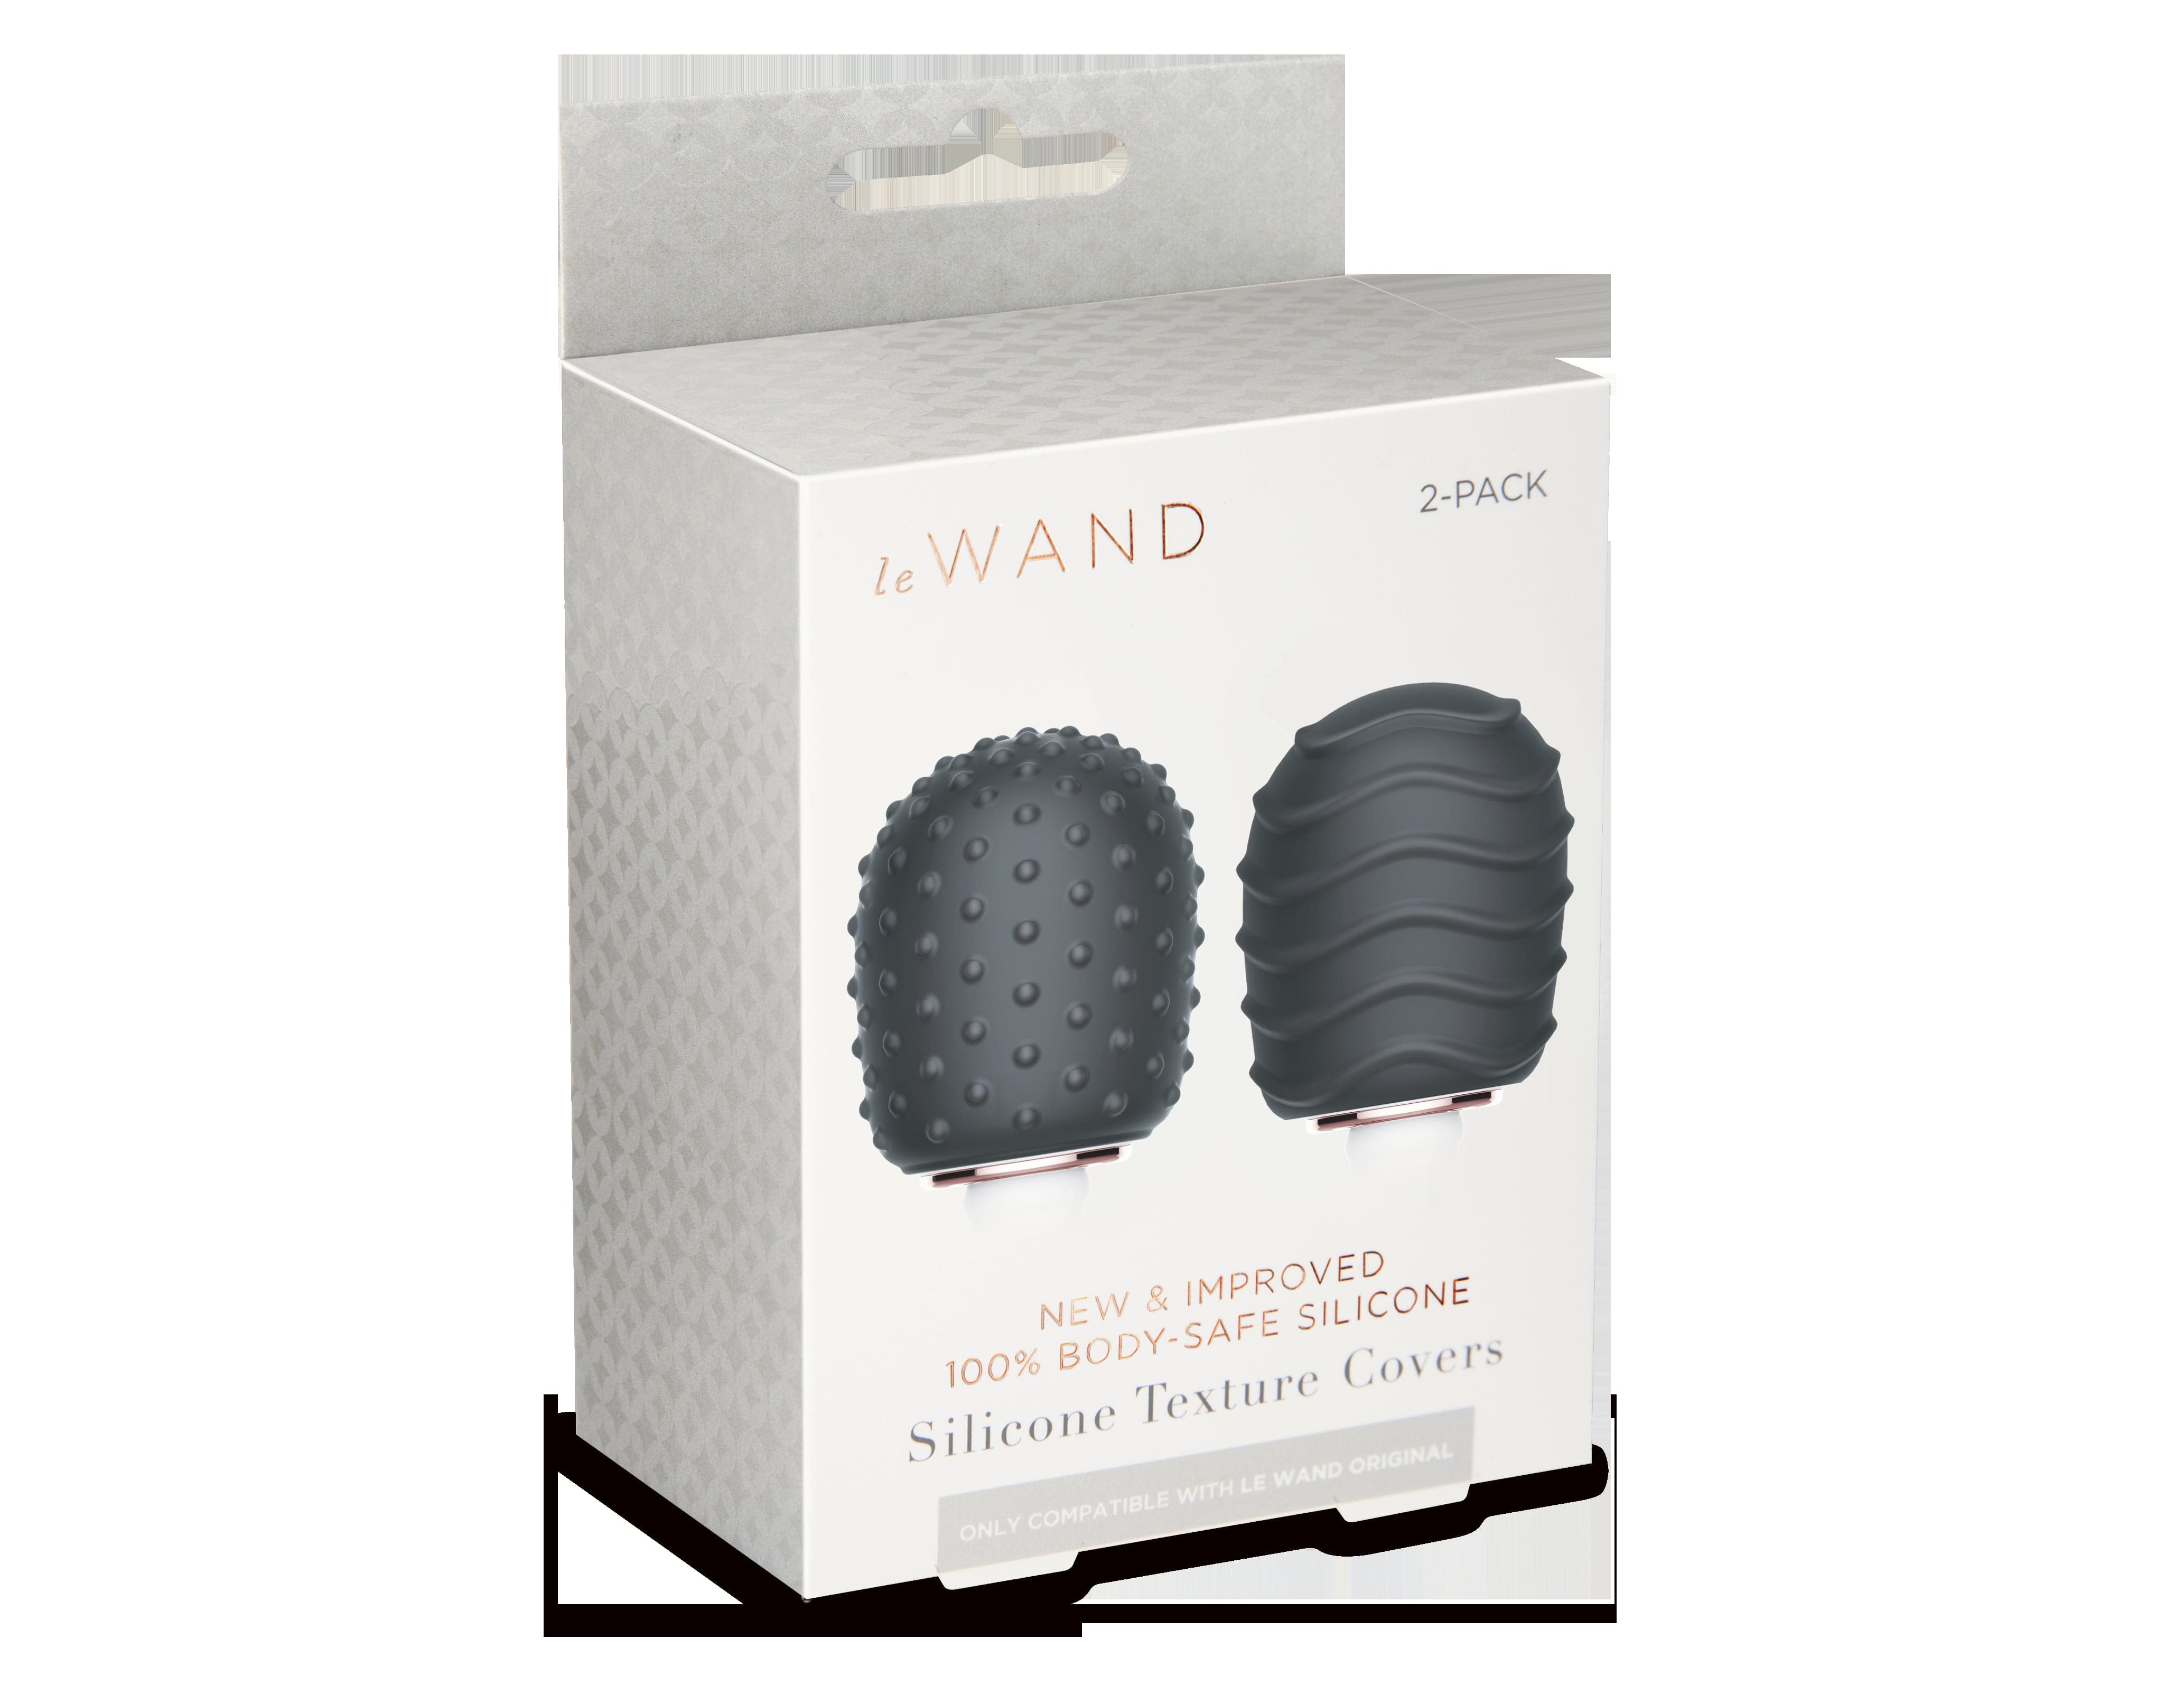 Le Wand Original Silicone Texture Covers – Amazing Intimate Essentials